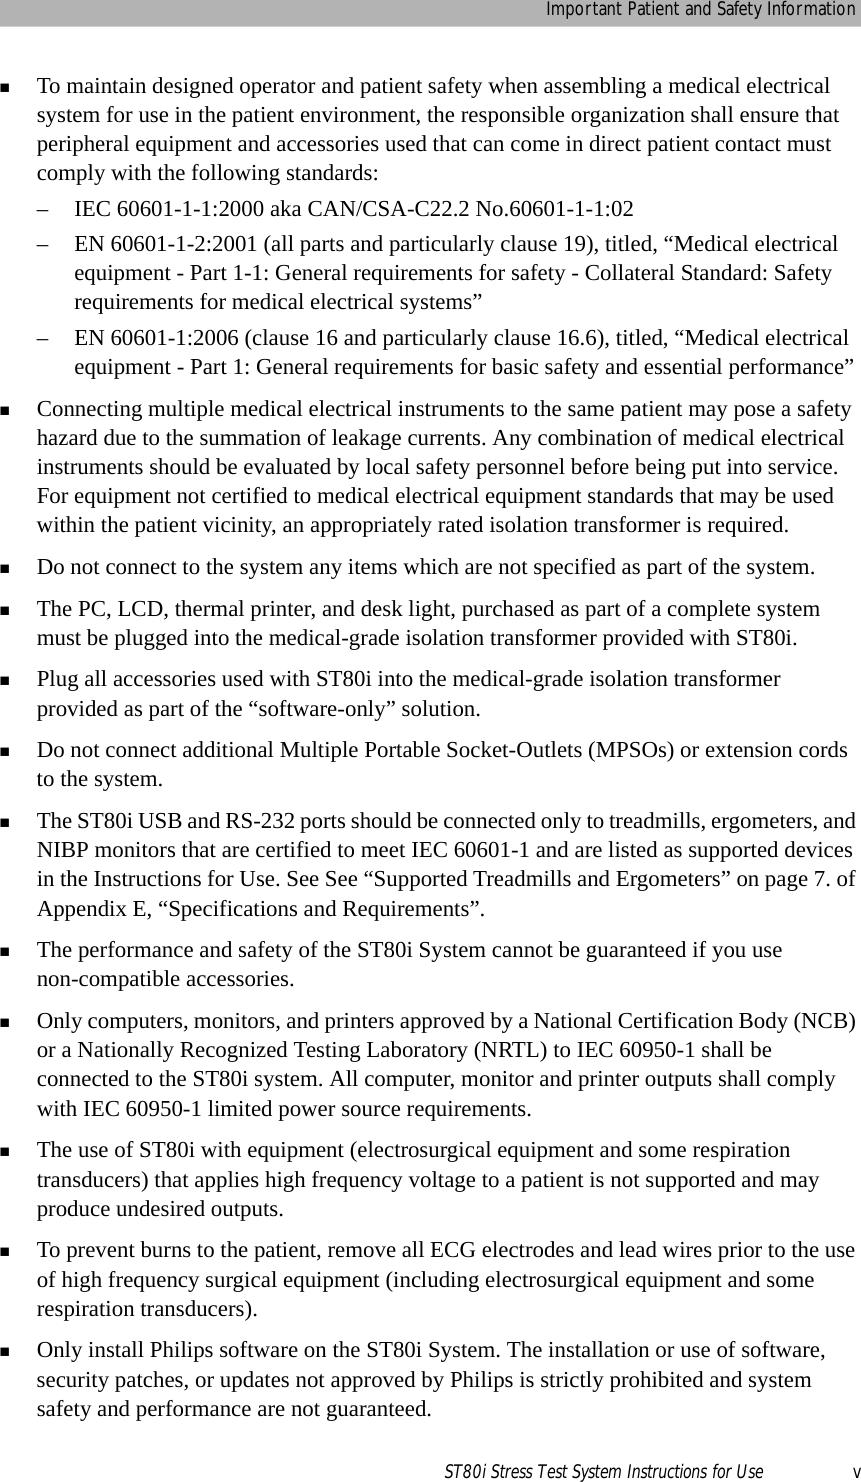 Important Patient and Safety InformationST80i Stress Test System Instructions for Use vTo maintain designed operator and patient safety when assembling a medical electrical system for use in the patient environment, the responsible organization shall ensure that peripheral equipment and accessories used that can come in direct patient contact must comply with the following standards:– IEC 60601-1-1:2000 aka CAN/CSA-C22.2 No.60601-1-1:02– EN 60601-1-2:2001 (all parts and particularly clause 19), titled, “Medical electrical equipment - Part 1-1: General requirements for safety - Collateral Standard: Safety requirements for medical electrical systems”– EN 60601-1:2006 (clause 16 and particularly clause 16.6), titled, “Medical electrical equipment - Part 1: General requirements for basic safety and essential performance”Connecting multiple medical electrical instruments to the same patient may pose a safety hazard due to the summation of leakage currents. Any combination of medical electrical instruments should be evaluated by local safety personnel before being put into service. For equipment not certified to medical electrical equipment standards that may be used within the patient vicinity, an appropriately rated isolation transformer is required.Do not connect to the system any items which are not specified as part of the system.The PC, LCD, thermal printer, and desk light, purchased as part of a complete system must be plugged into the medical-grade isolation transformer provided with ST80i.Plug all accessories used with ST80i into the medical-grade isolation transformer provided as part of the “software-only” solution.Do not connect additional Multiple Portable Socket-Outlets (MPSOs) or extension cords to the system.The ST80i USB and RS-232 ports should be connected only to treadmills, ergometers, and NIBP monitors that are certified to meet IEC 60601-1 and are listed as supported devices in the Instructions for Use. See See “Supported Treadmills and Ergometers” on page 7. of Appendix E, “Specifications and Requirements”.The performance and safety of the ST80i System cannot be guaranteed if you use non-compatible accessories.Only computers, monitors, and printers approved by a National Certification Body (NCB) or a Nationally Recognized Testing Laboratory (NRTL) to IEC 60950-1 shall be connected to the ST80i system. All computer, monitor and printer outputs shall comply with IEC 60950-1 limited power source requirements.The use of ST80i with equipment (electrosurgical equipment and some respiration transducers) that applies high frequency voltage to a patient is not supported and may produce undesired outputs.To prevent burns to the patient, remove all ECG electrodes and lead wires prior to the use of high frequency surgical equipment (including electrosurgical equipment and some respiration transducers).Only install Philips software on the ST80i System. The installation or use of software, security patches, or updates not approved by Philips is strictly prohibited and system safety and performance are not guaranteed. 